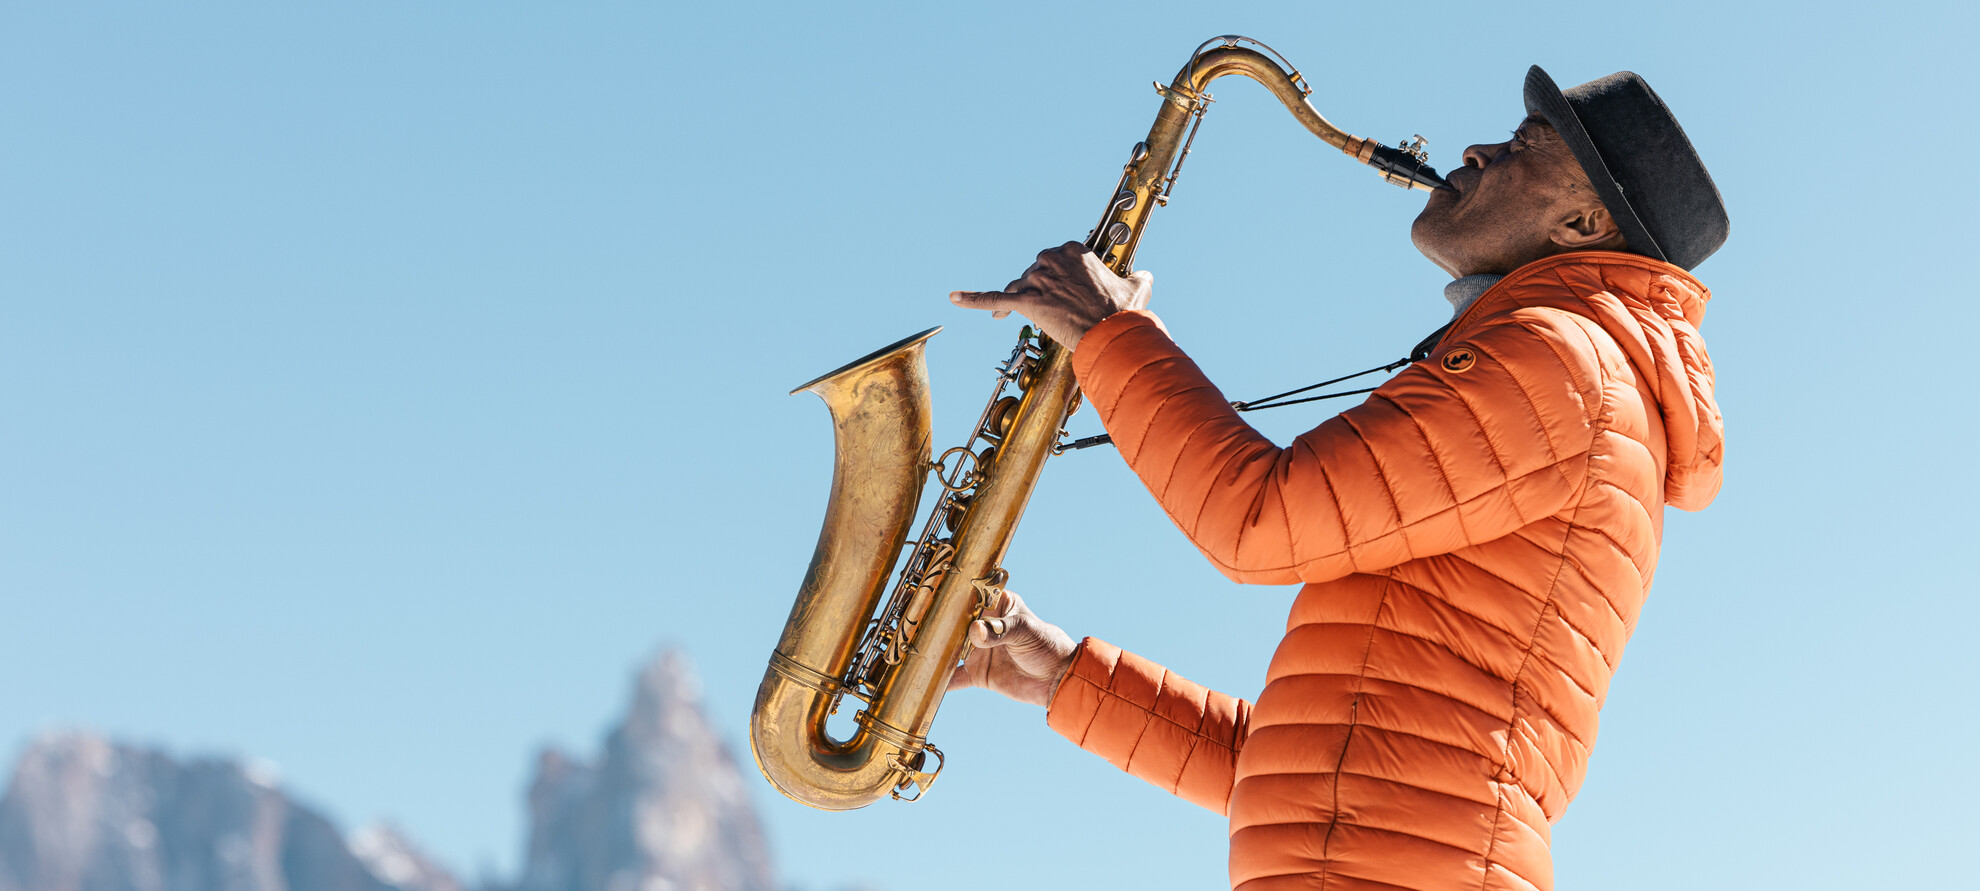 Warm up to music on the snow